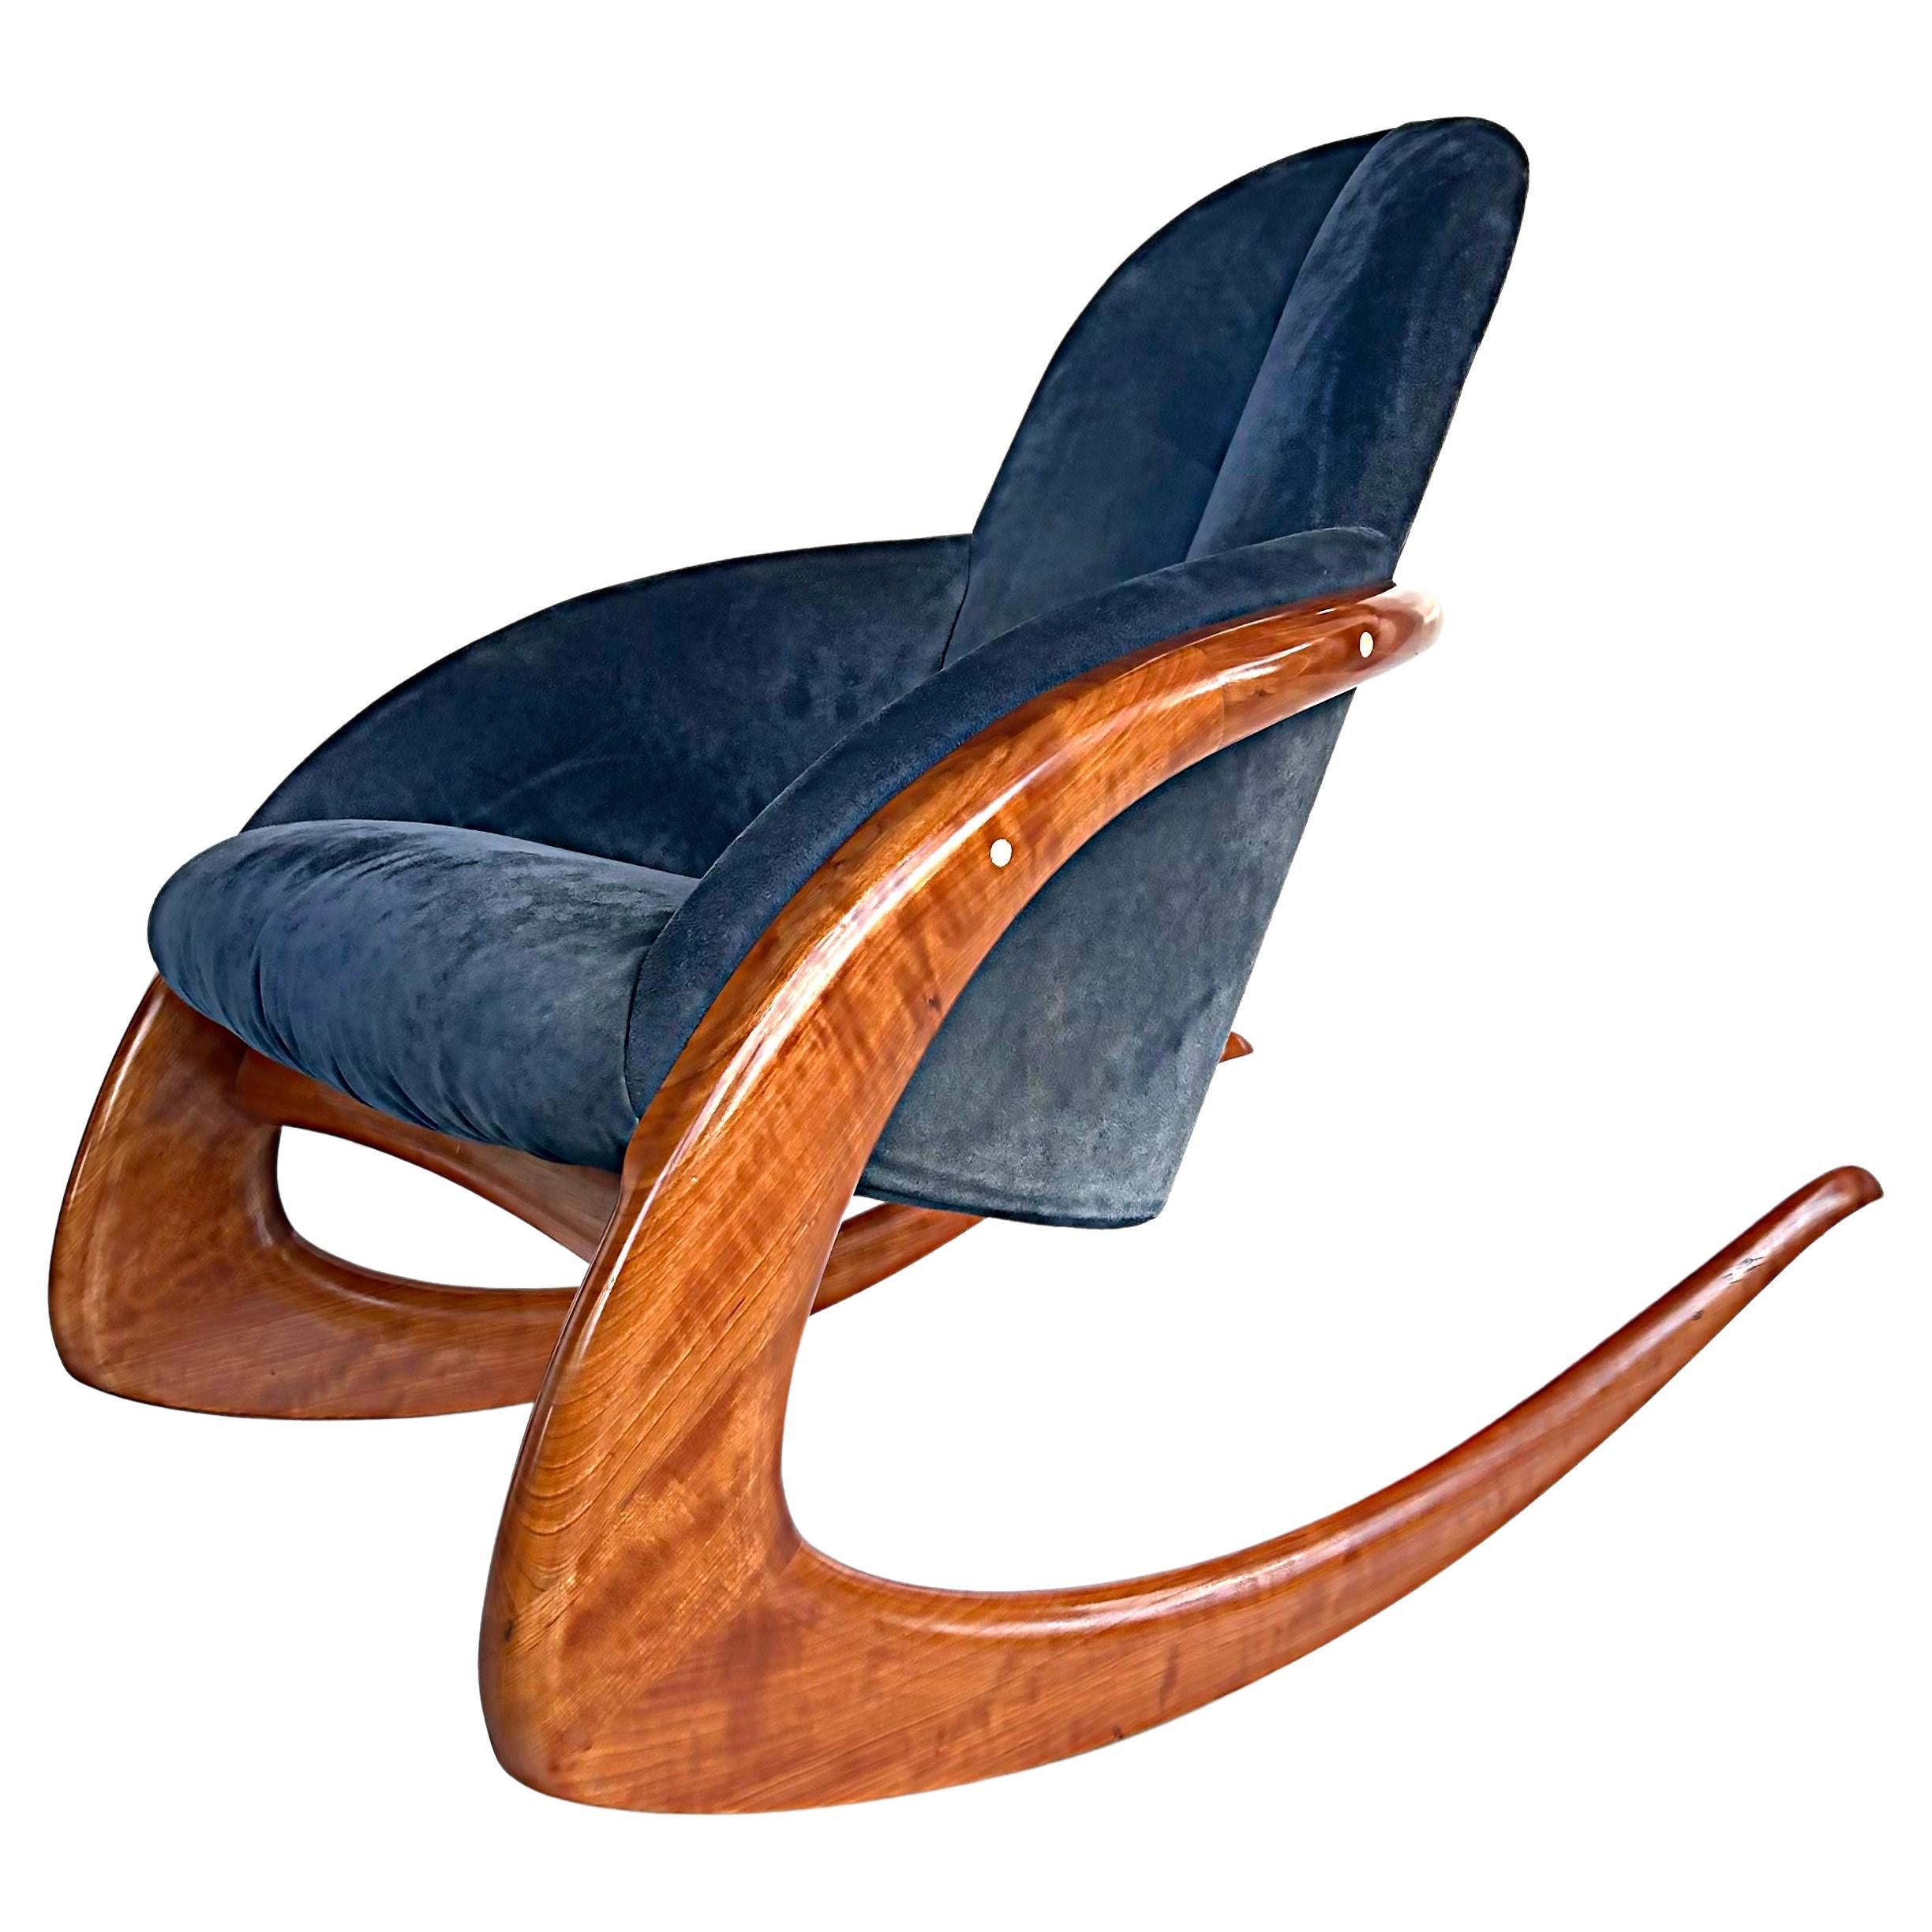 Wendell Castle Crescent Moon Wood and Suede Rocking Chair For Sale